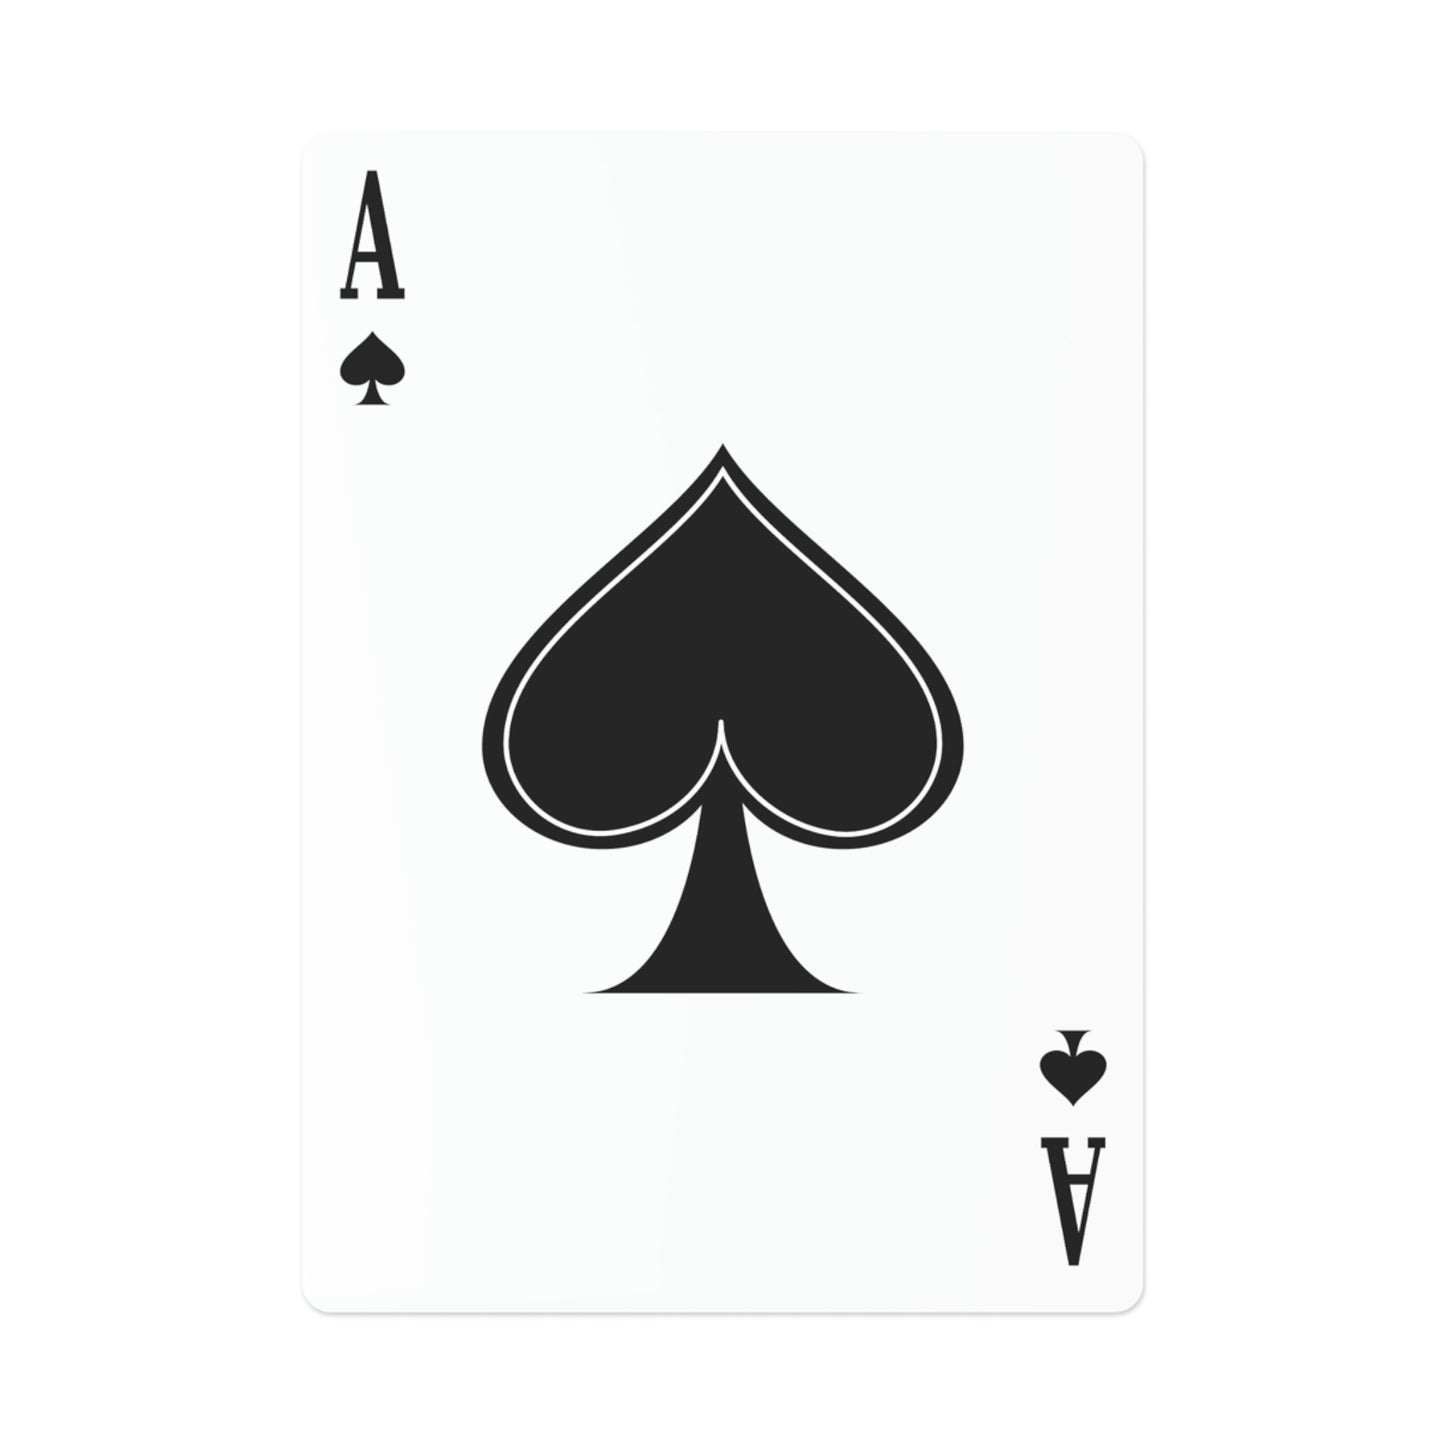 Gheist - Playing Cards